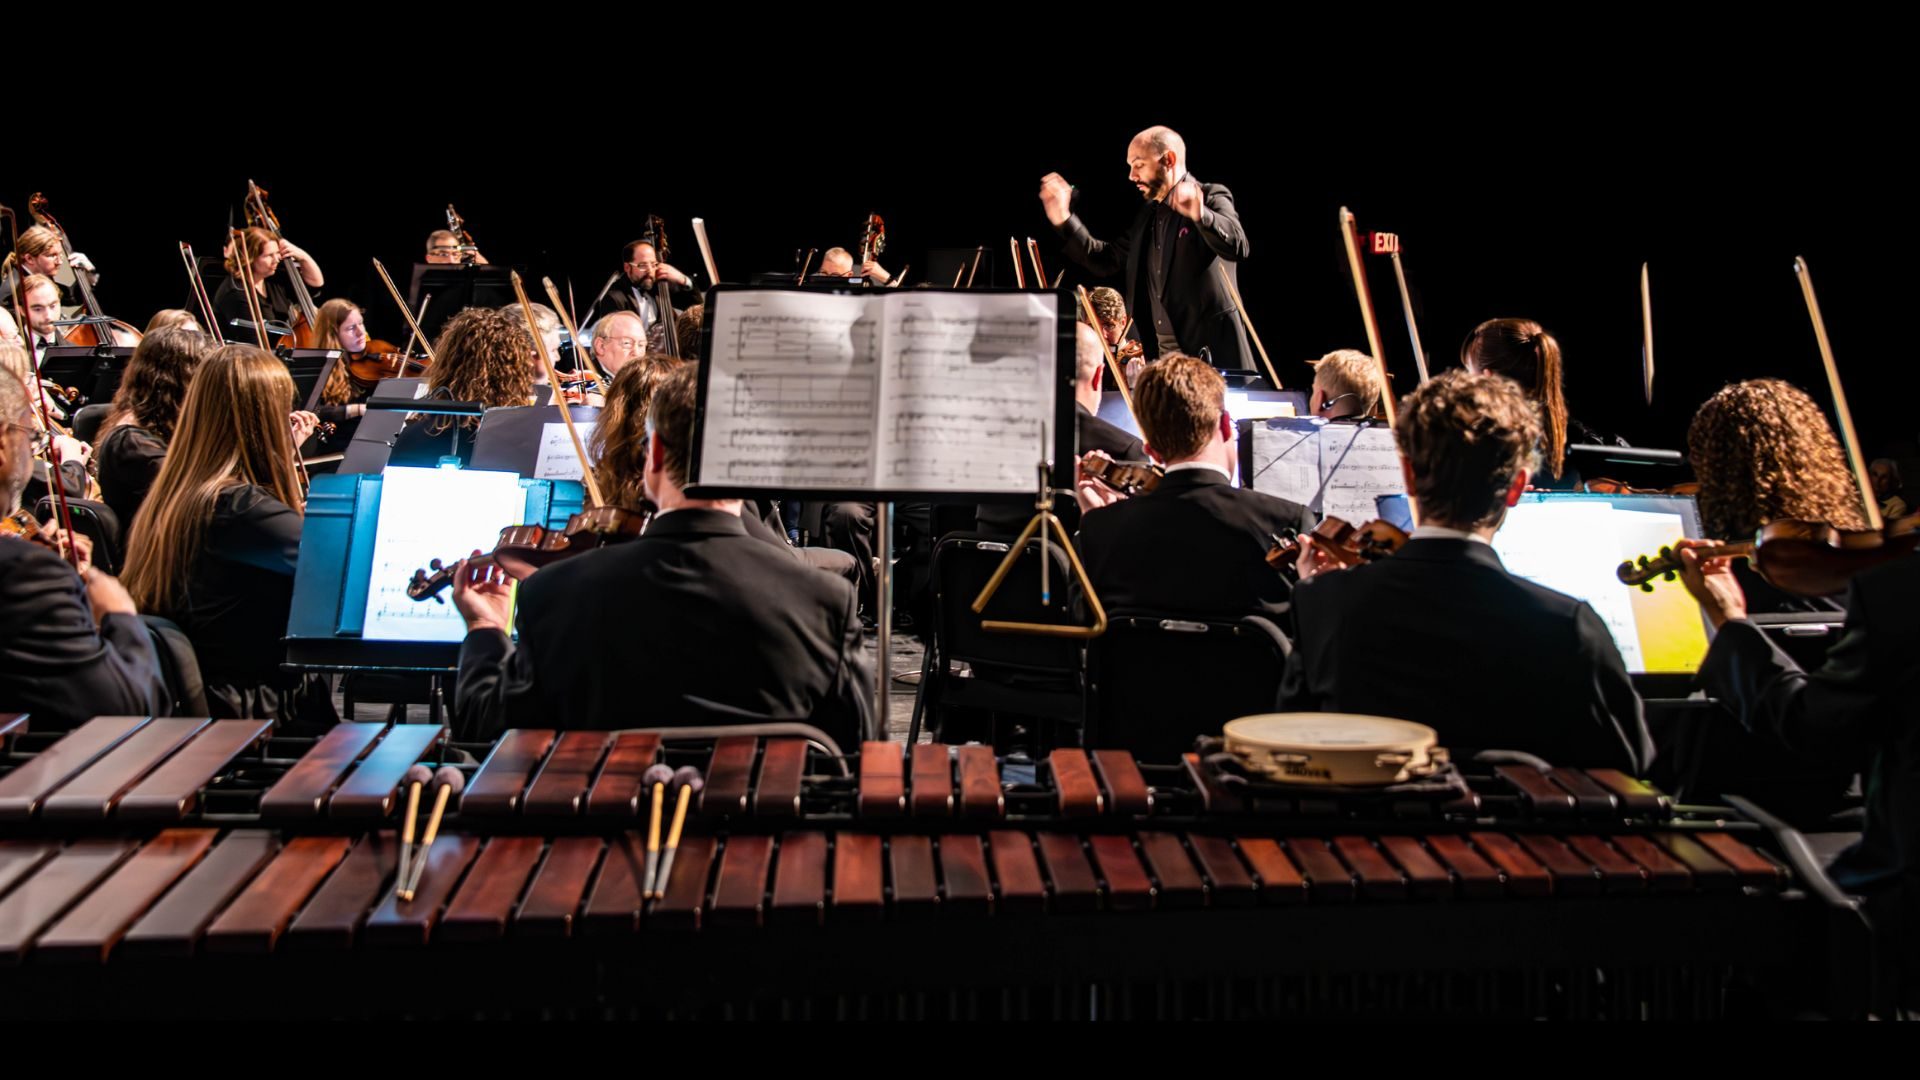 color photograph or wodden marimba instrument in an orchestra settings with the conductor leading the group in the background